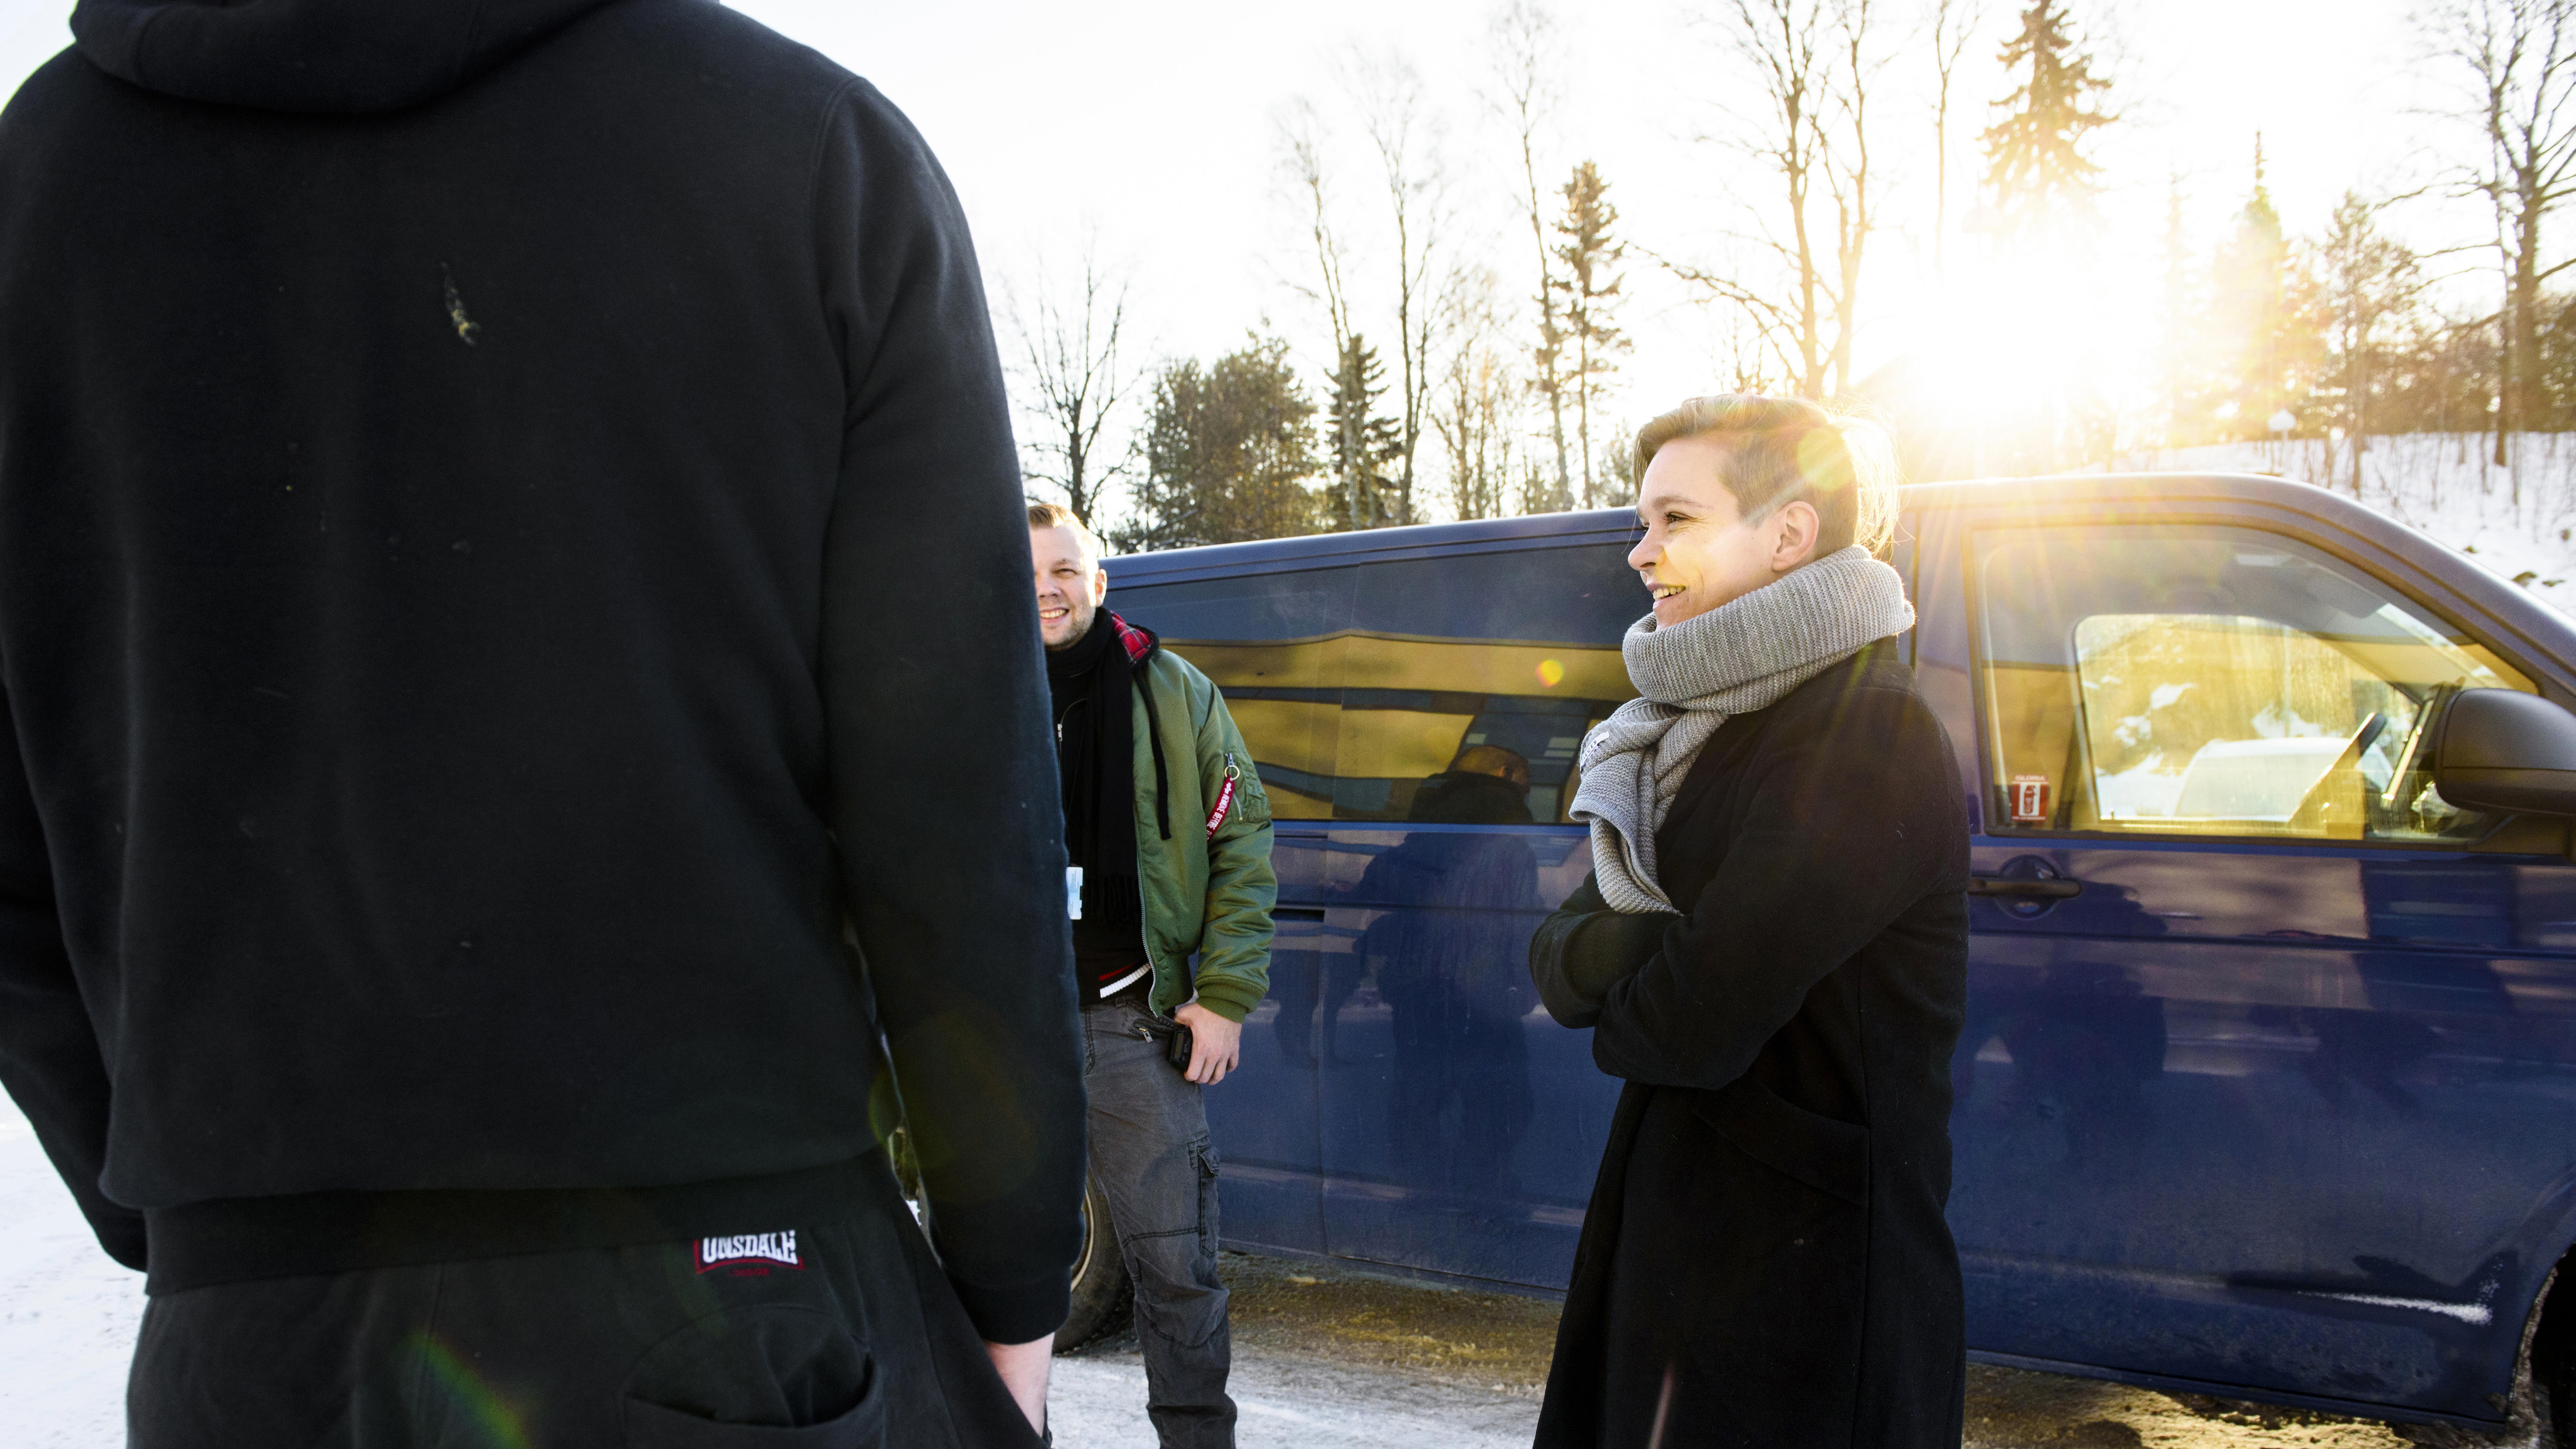 A woman and a man talk with another man, who is facing away from the camera, in front of a blue van outdoors in winter.